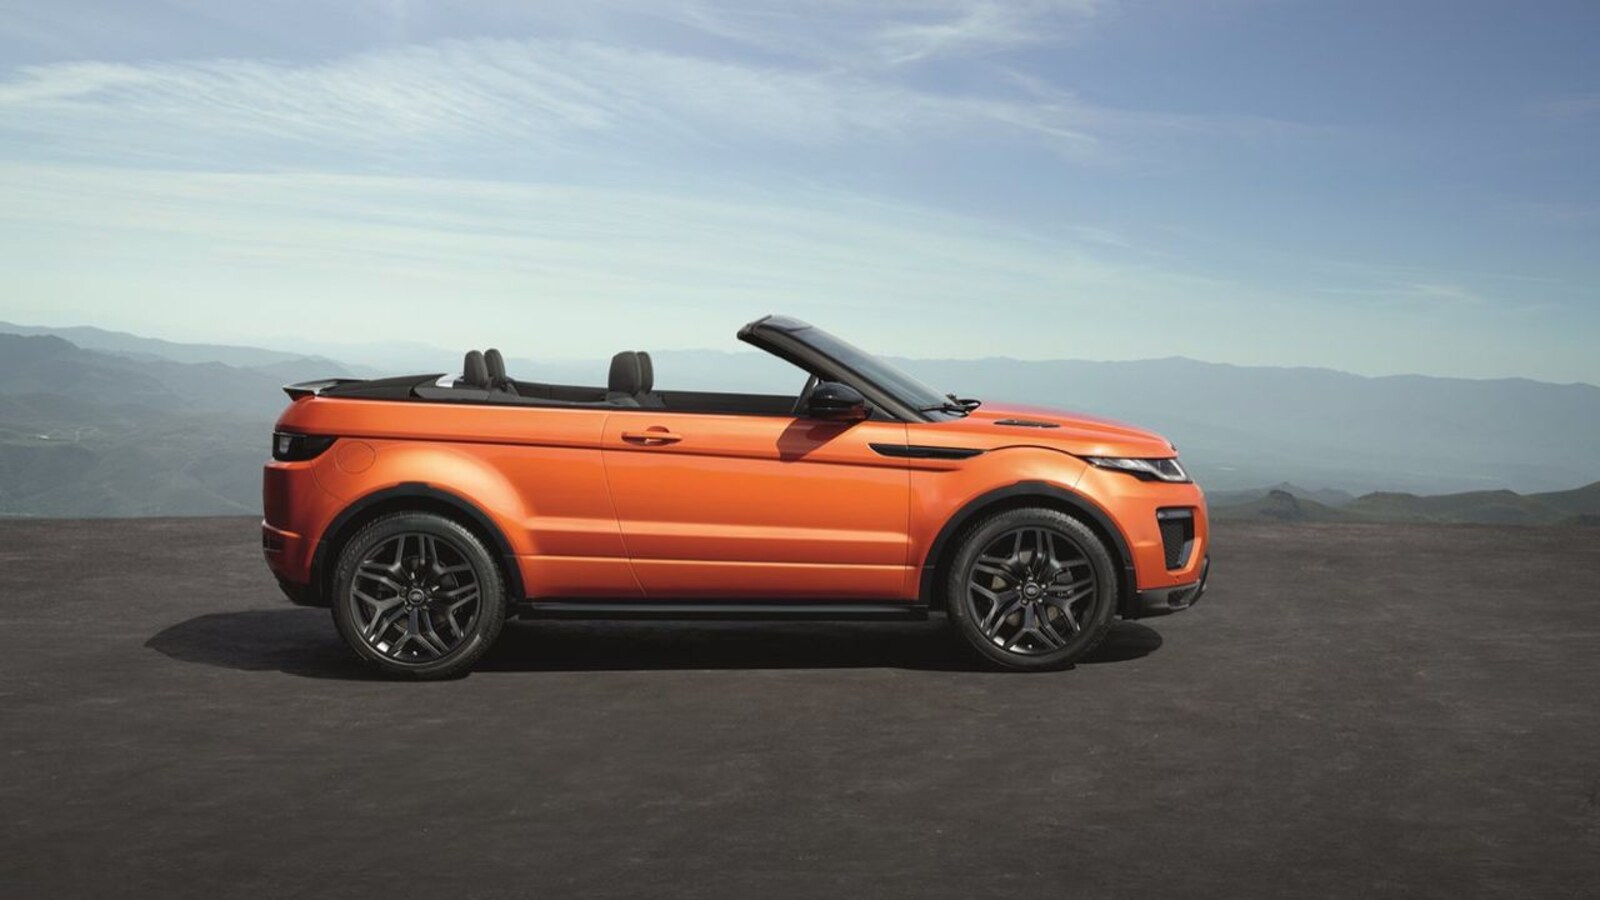 Land Rover launches country's first convertible SUV under the